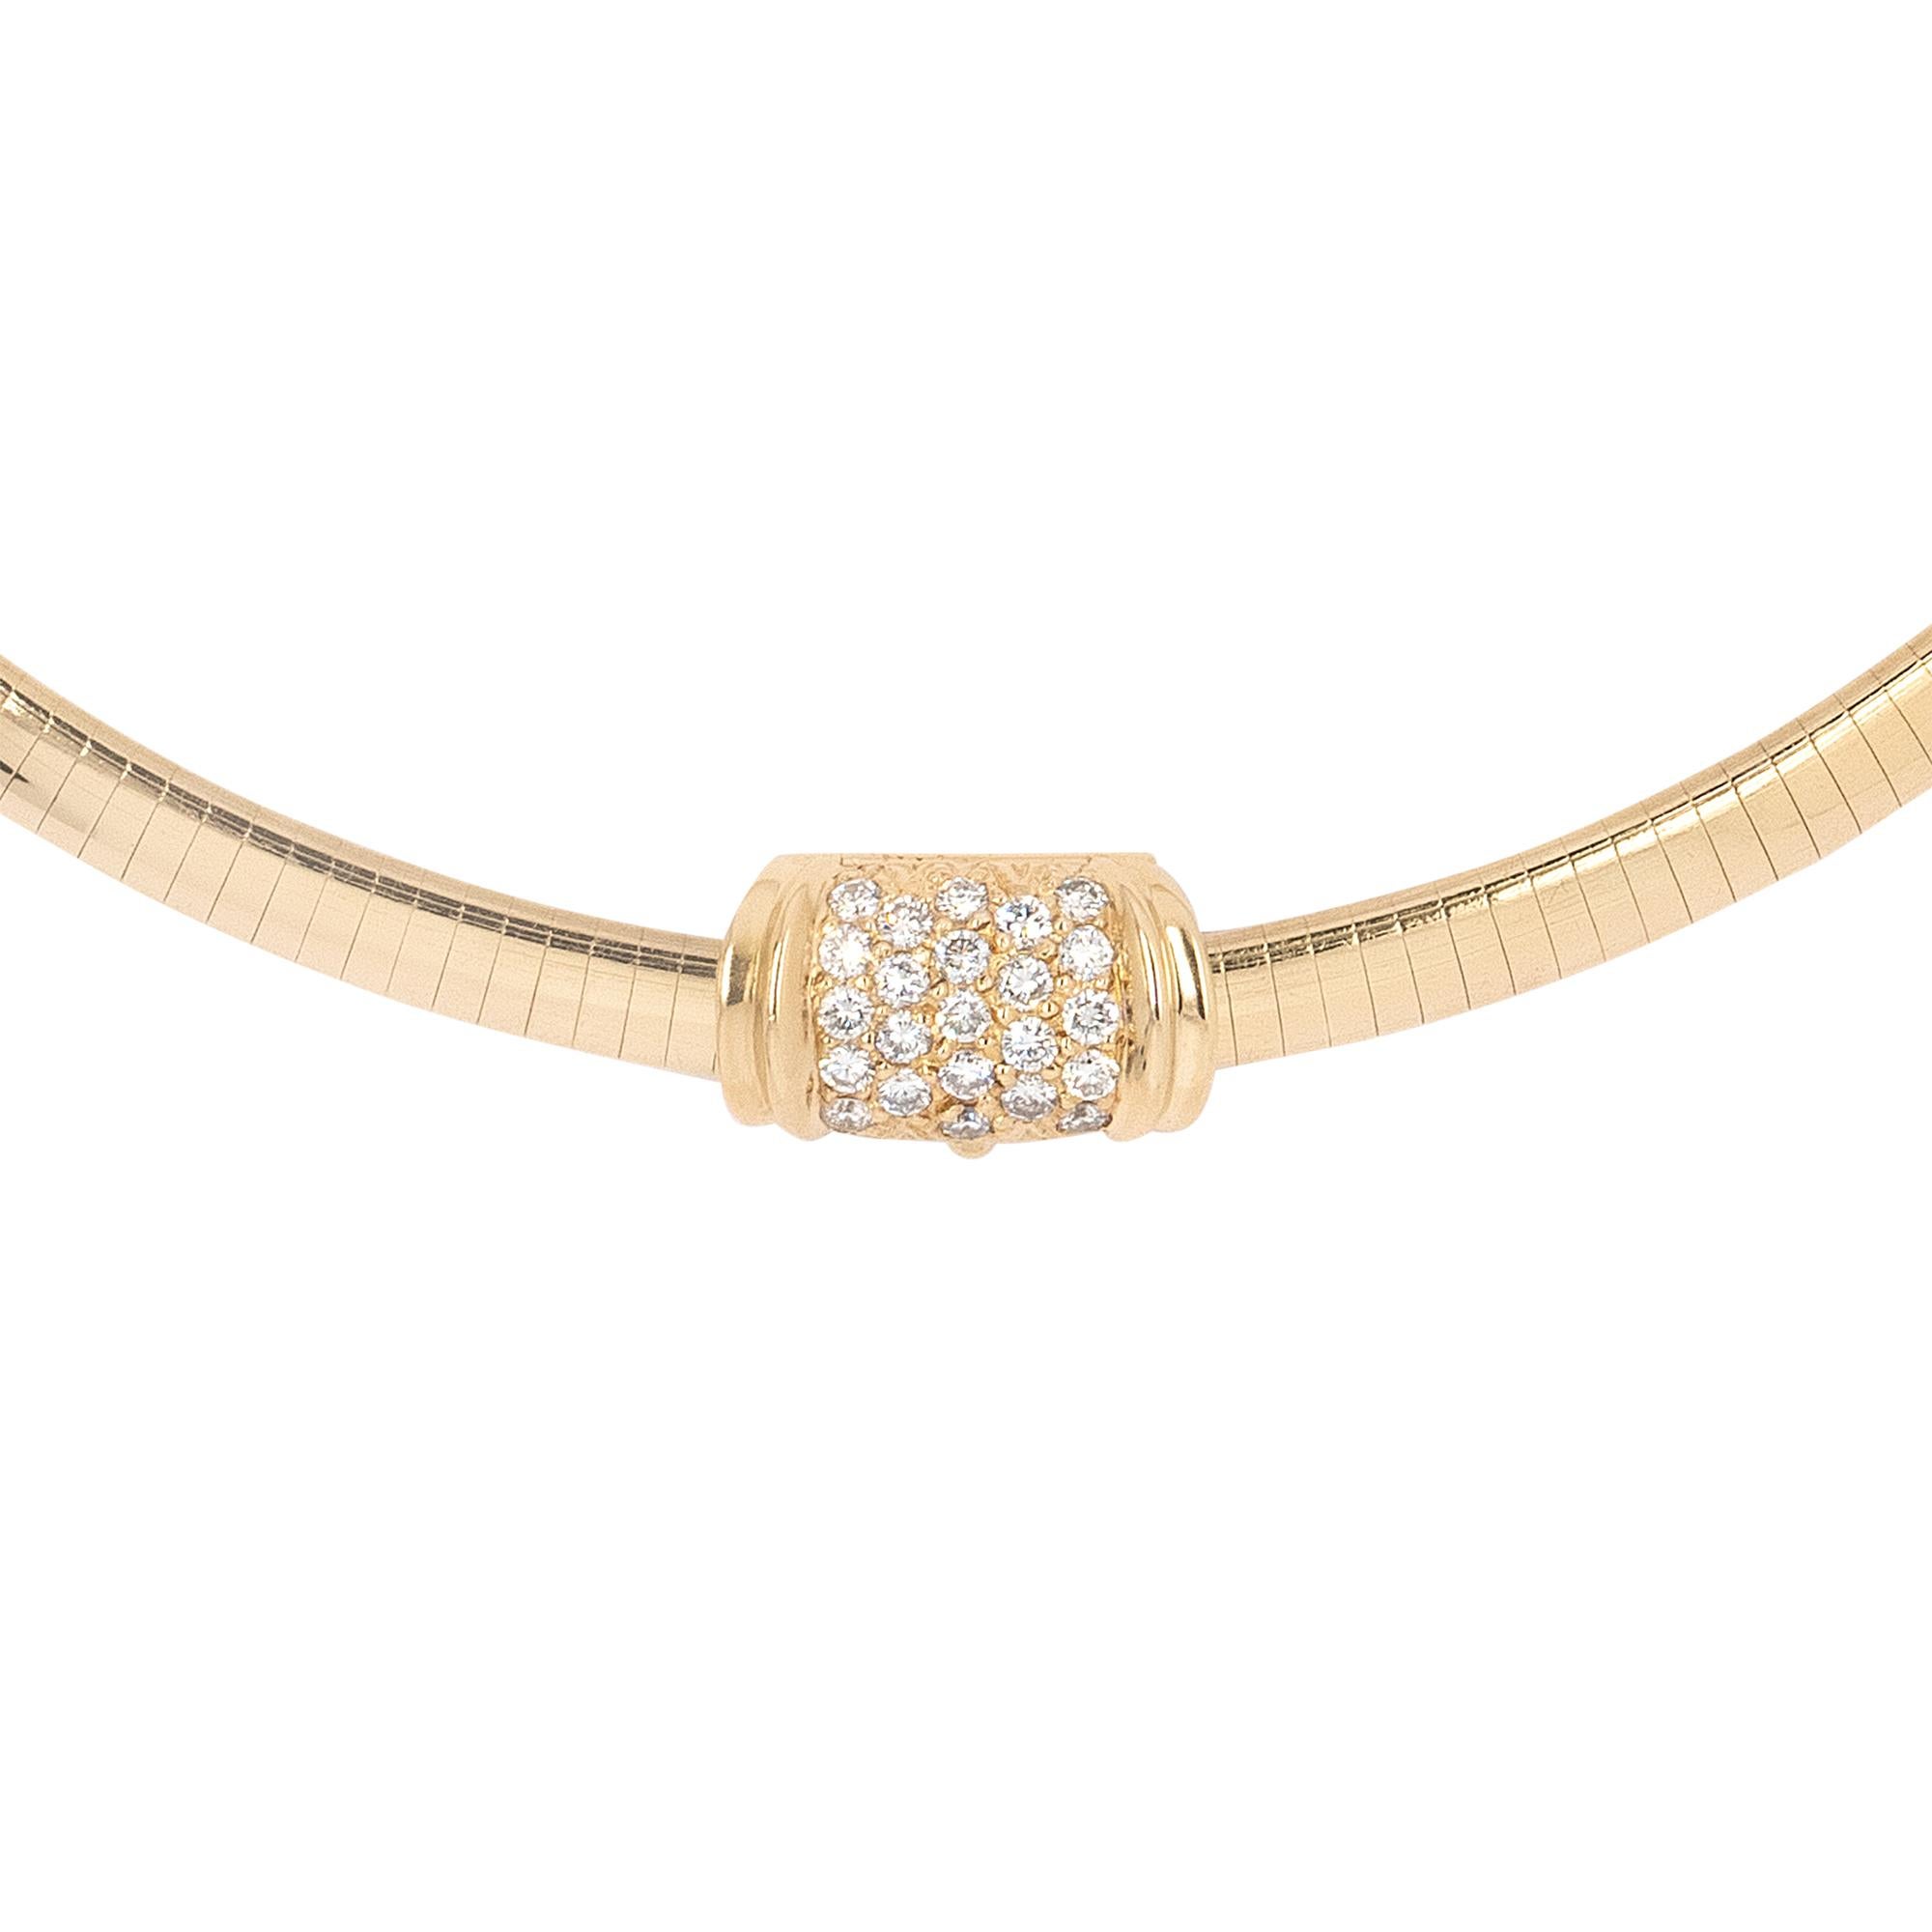 Material: 14k Yellow Gold
Necklace Measurements: 16